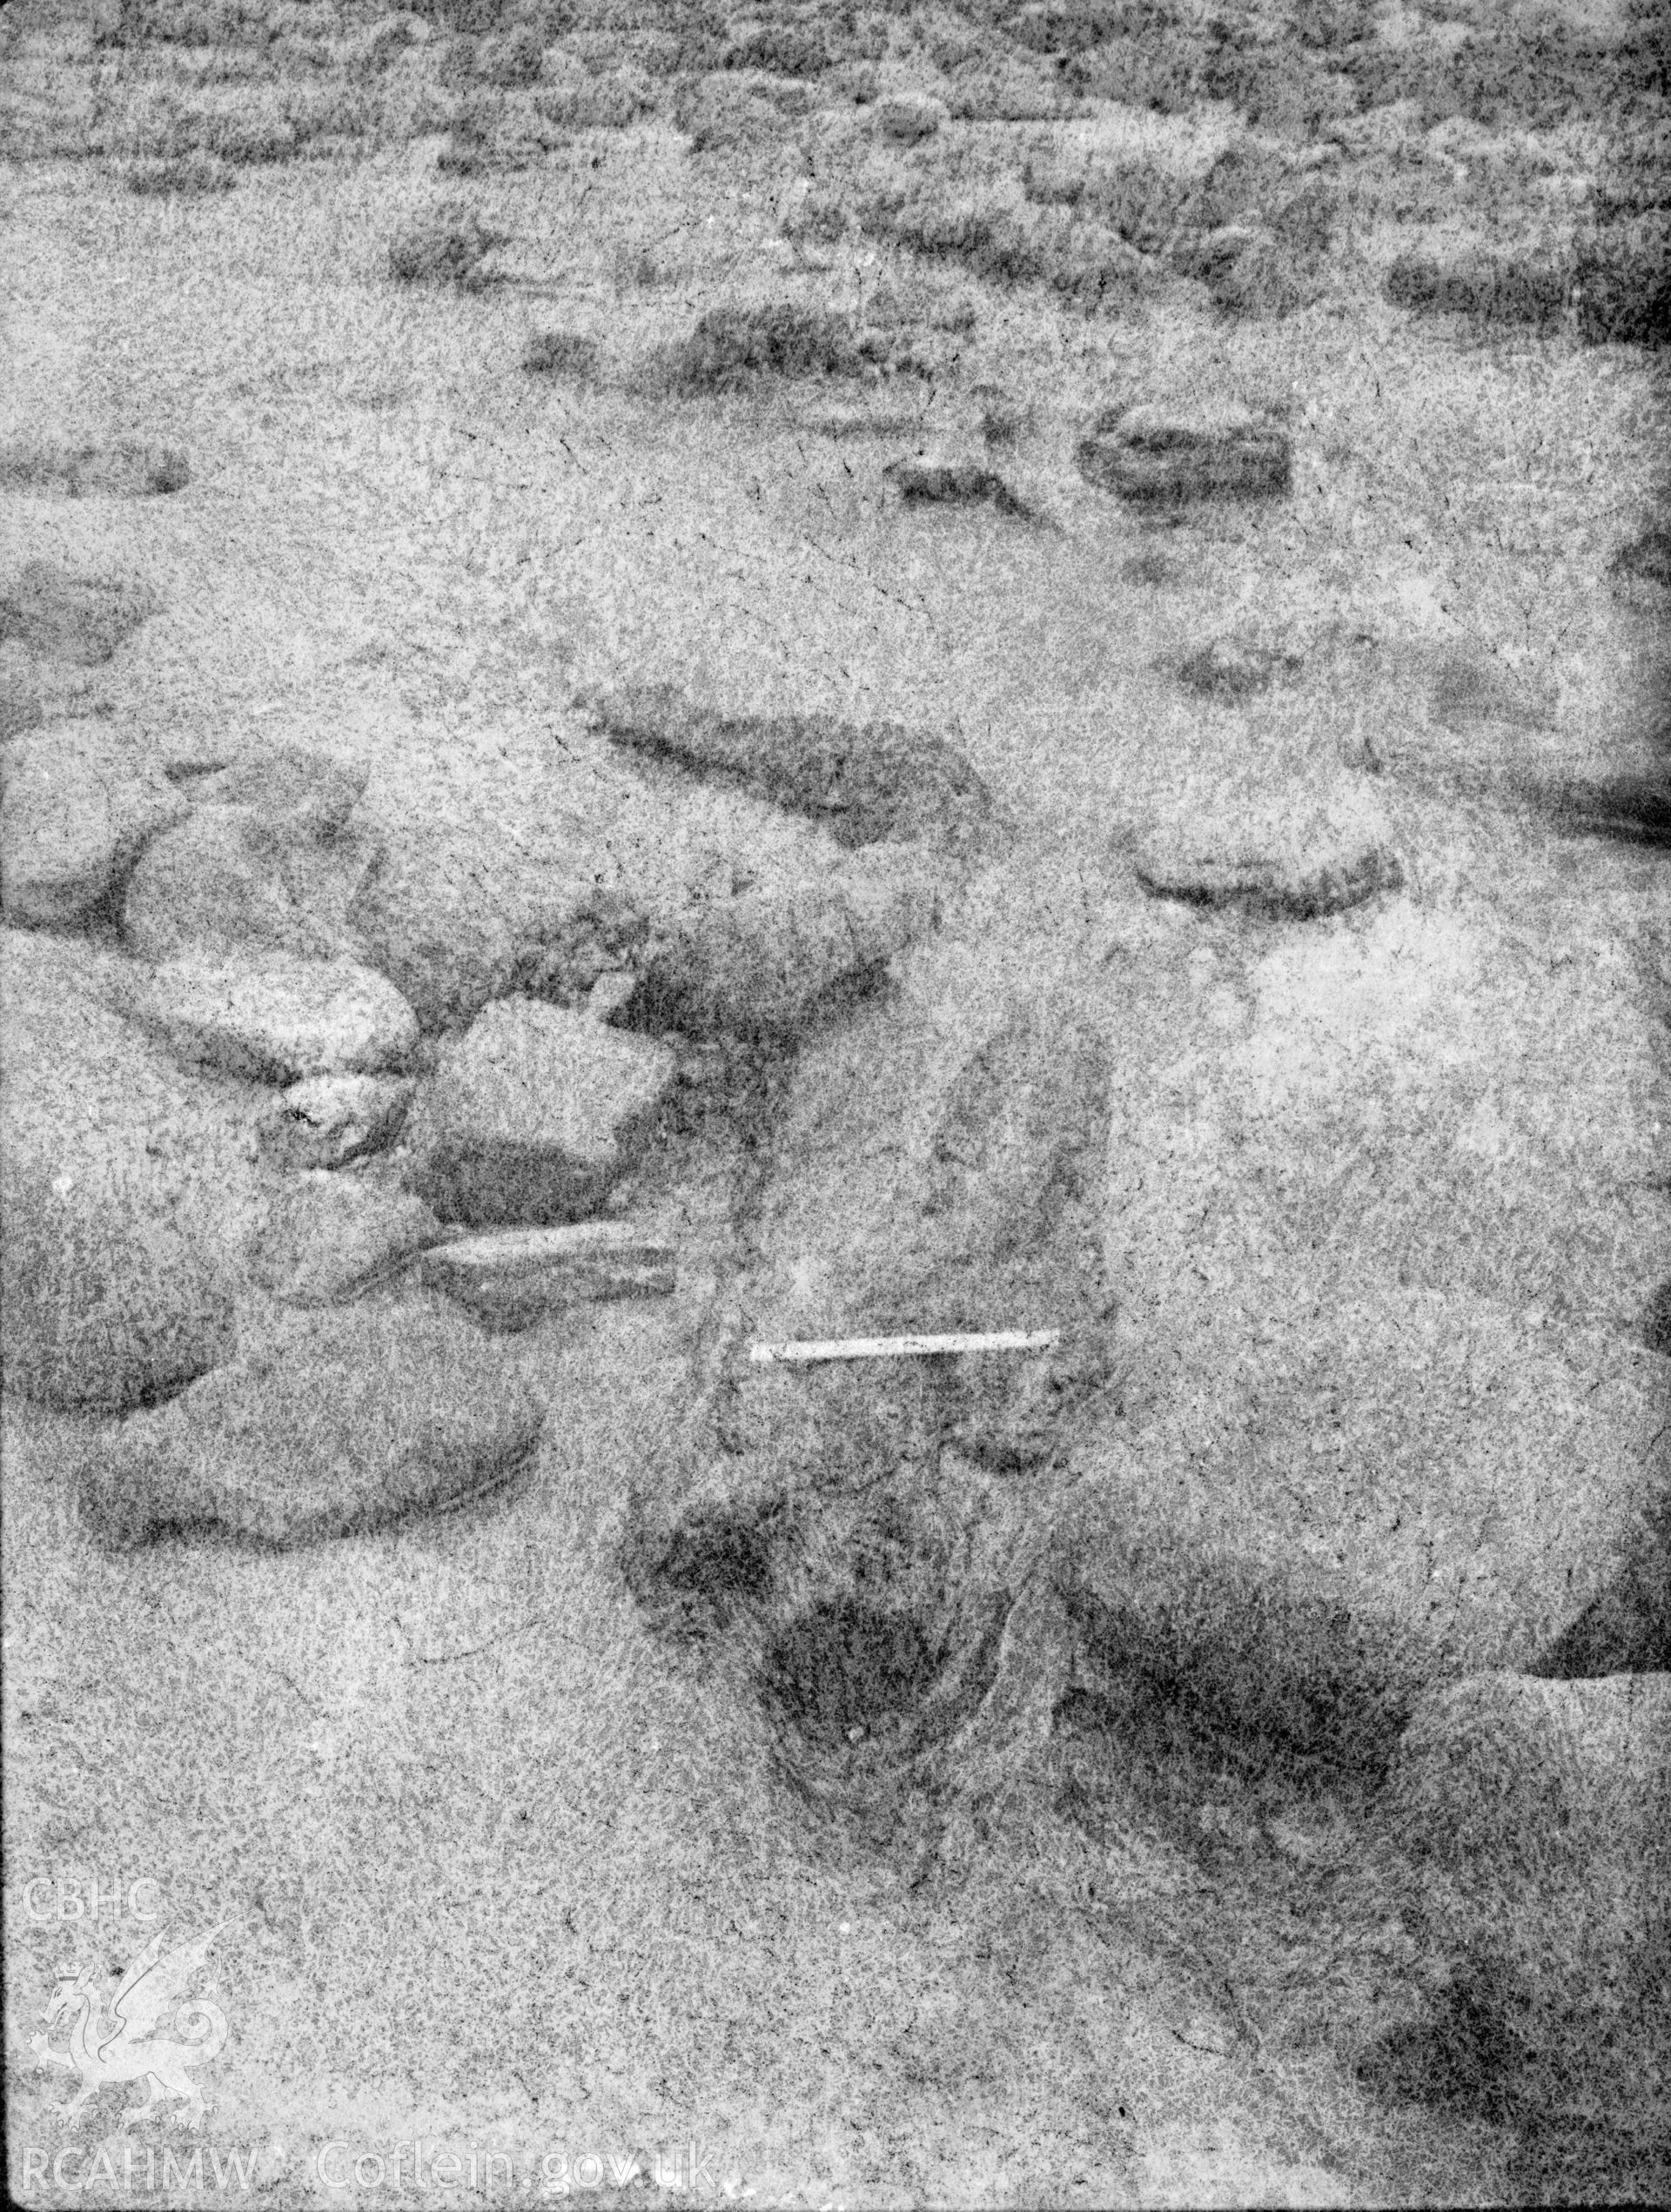 Digital copy of a nitrate negative showing submerged forest at Wiseman's Bridge, Pembrokeshire, taken by H. Collin Bowen c.1967.